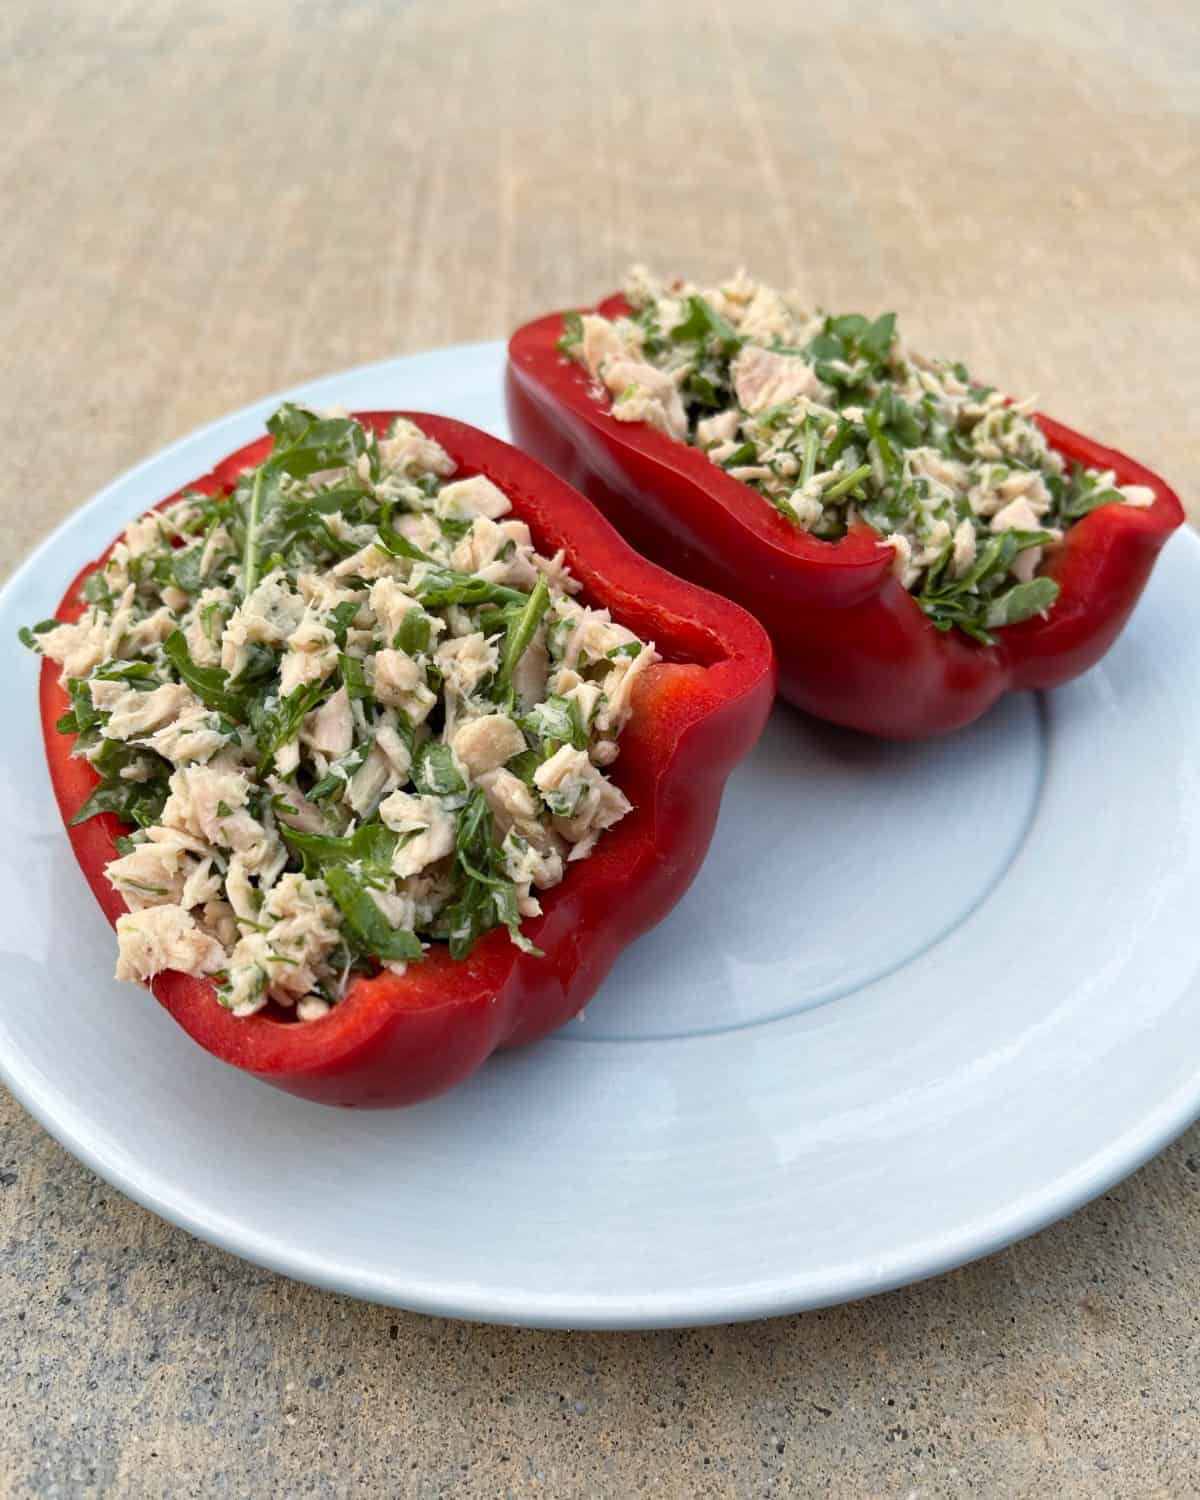 Red bell peppers stuffed with tuna and fresh chopped herbs on small blue plate.